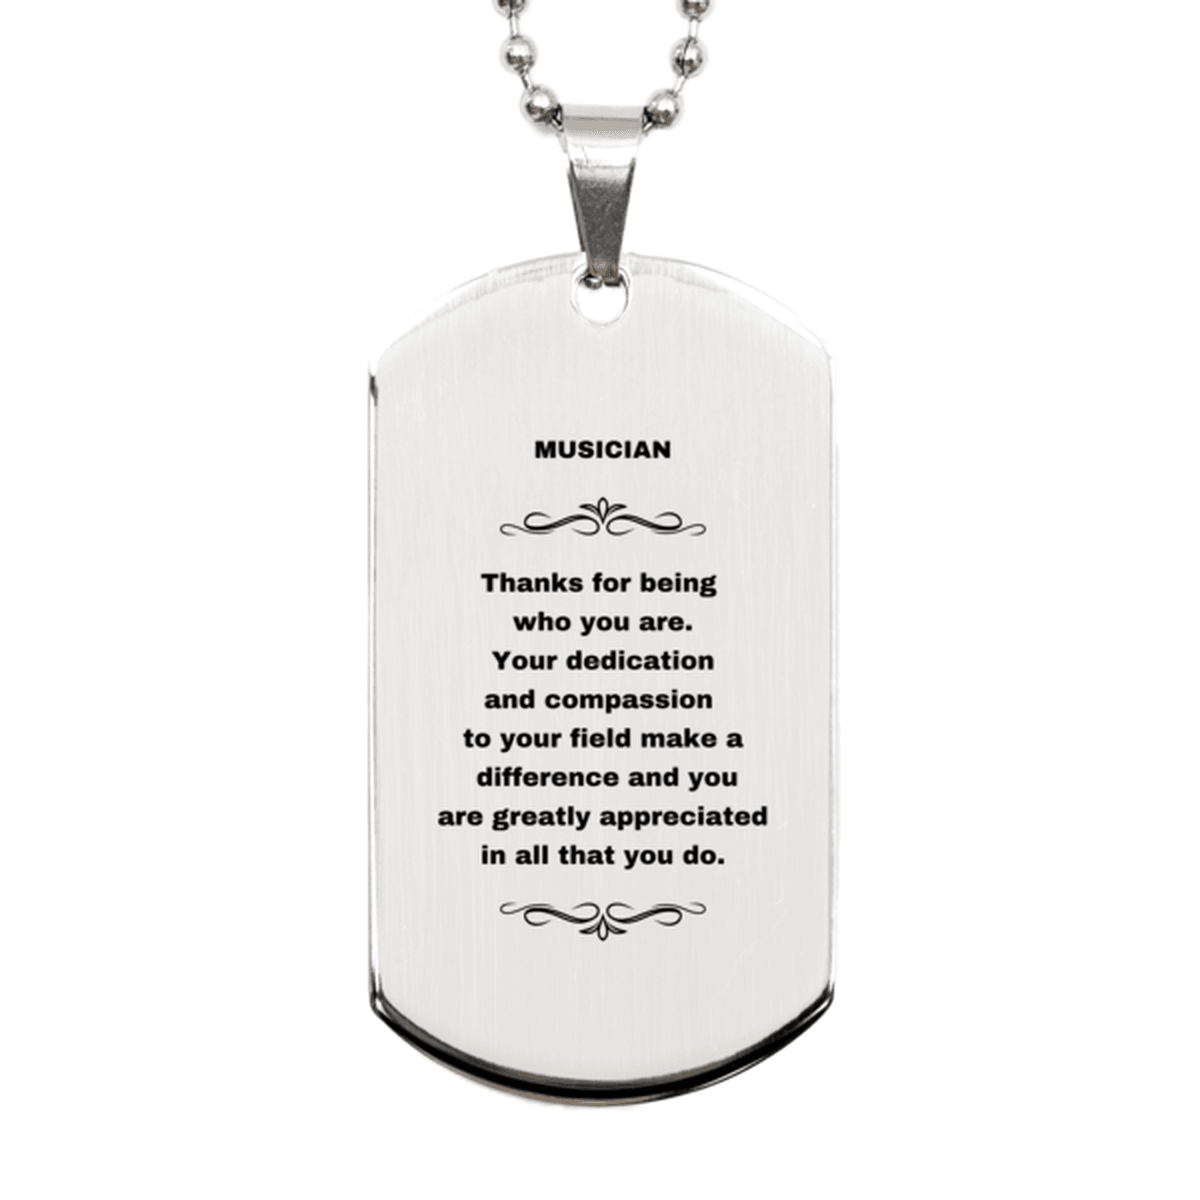 Musician Silver Dog Tag Necklace - Thanks for being who you are - Birthday Christmas Jewelry Gifts Coworkers Colleague Boss - Mallard Moon Gift Shop